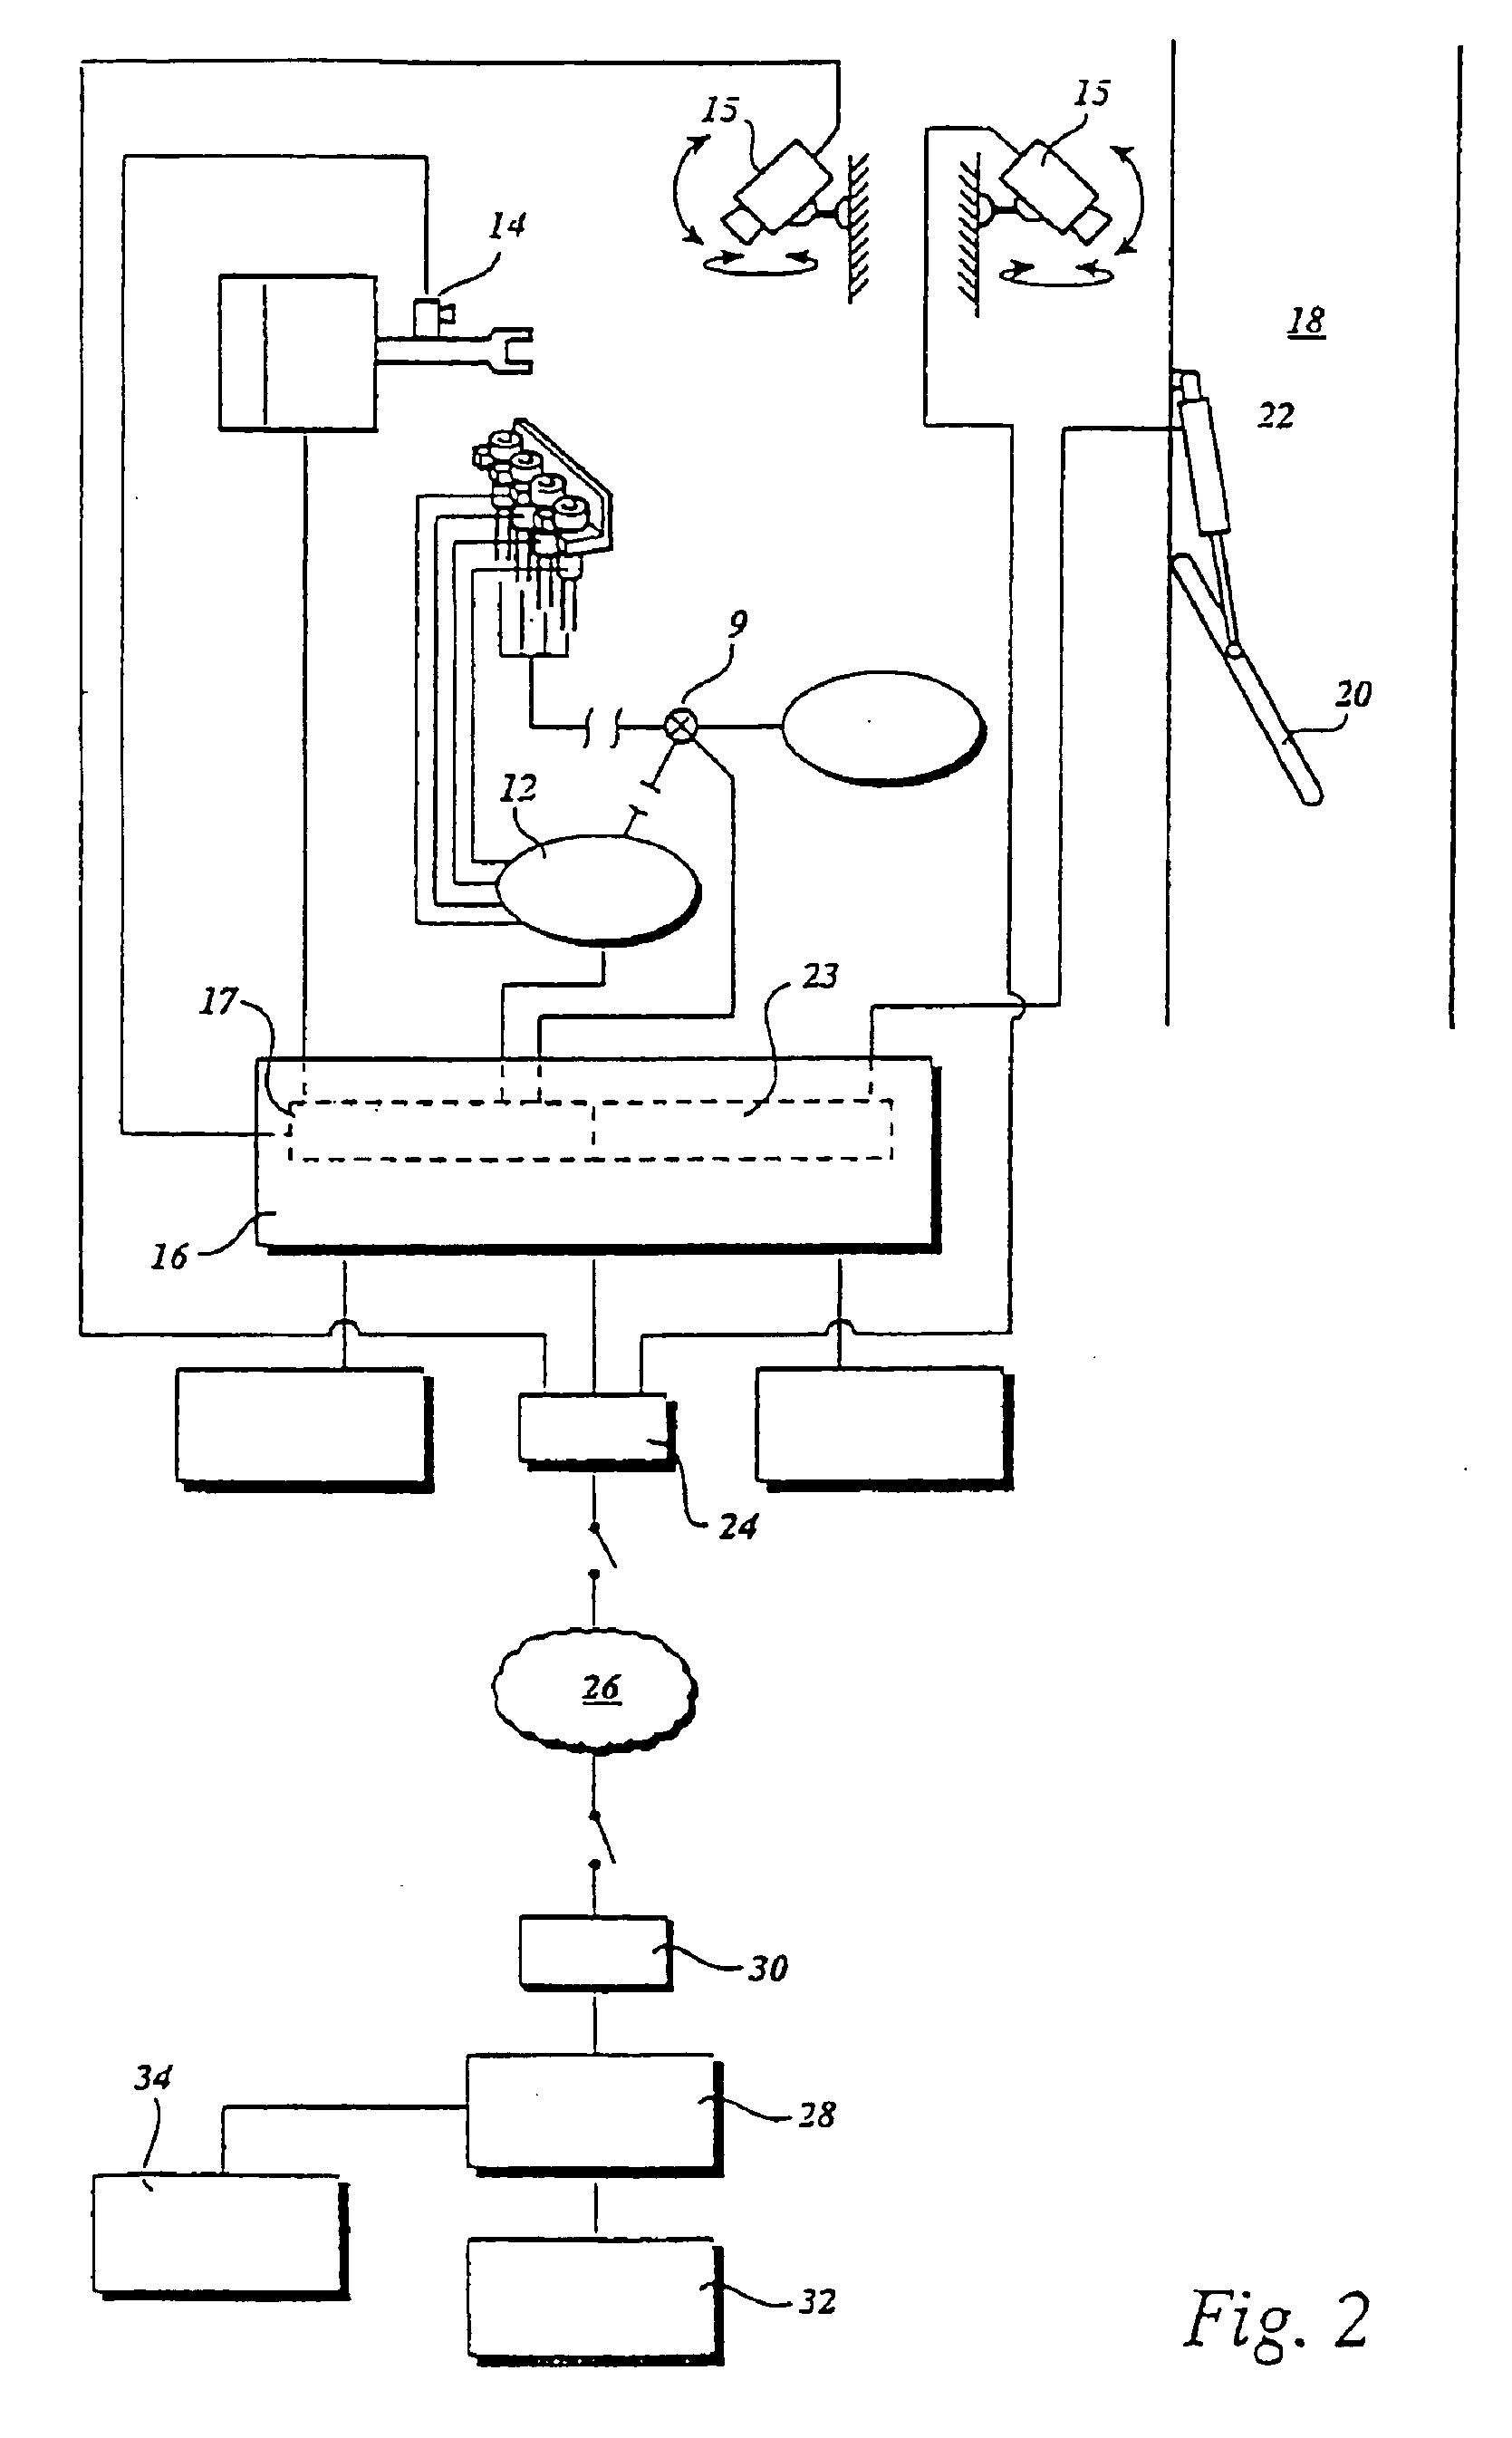 Apparatus and a method for monitoring an animal related space